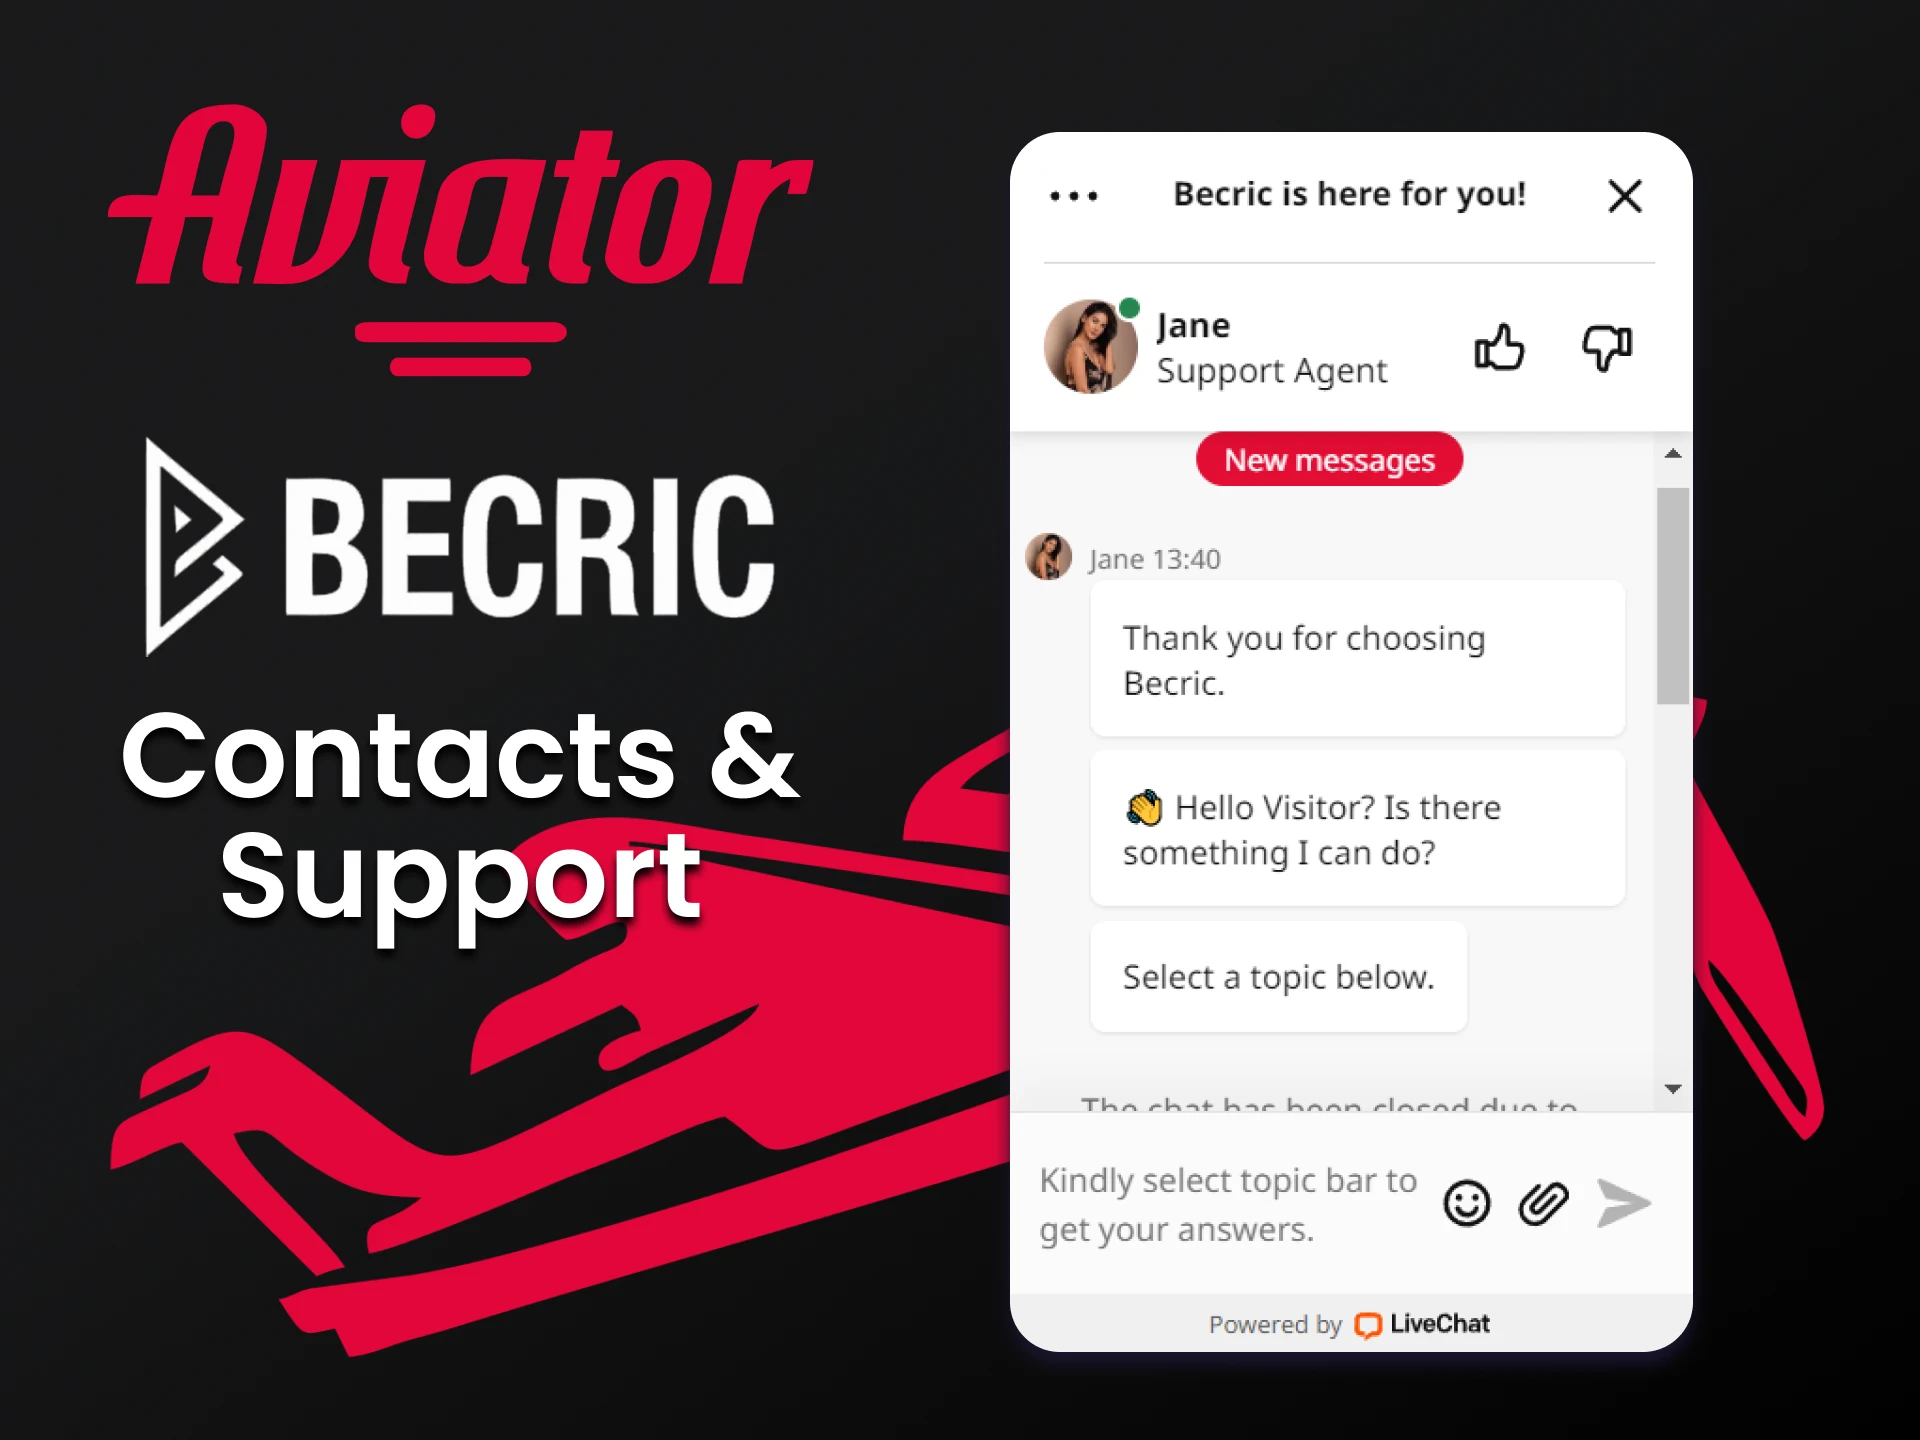 If you have any questions, please contact the special Becric chat.